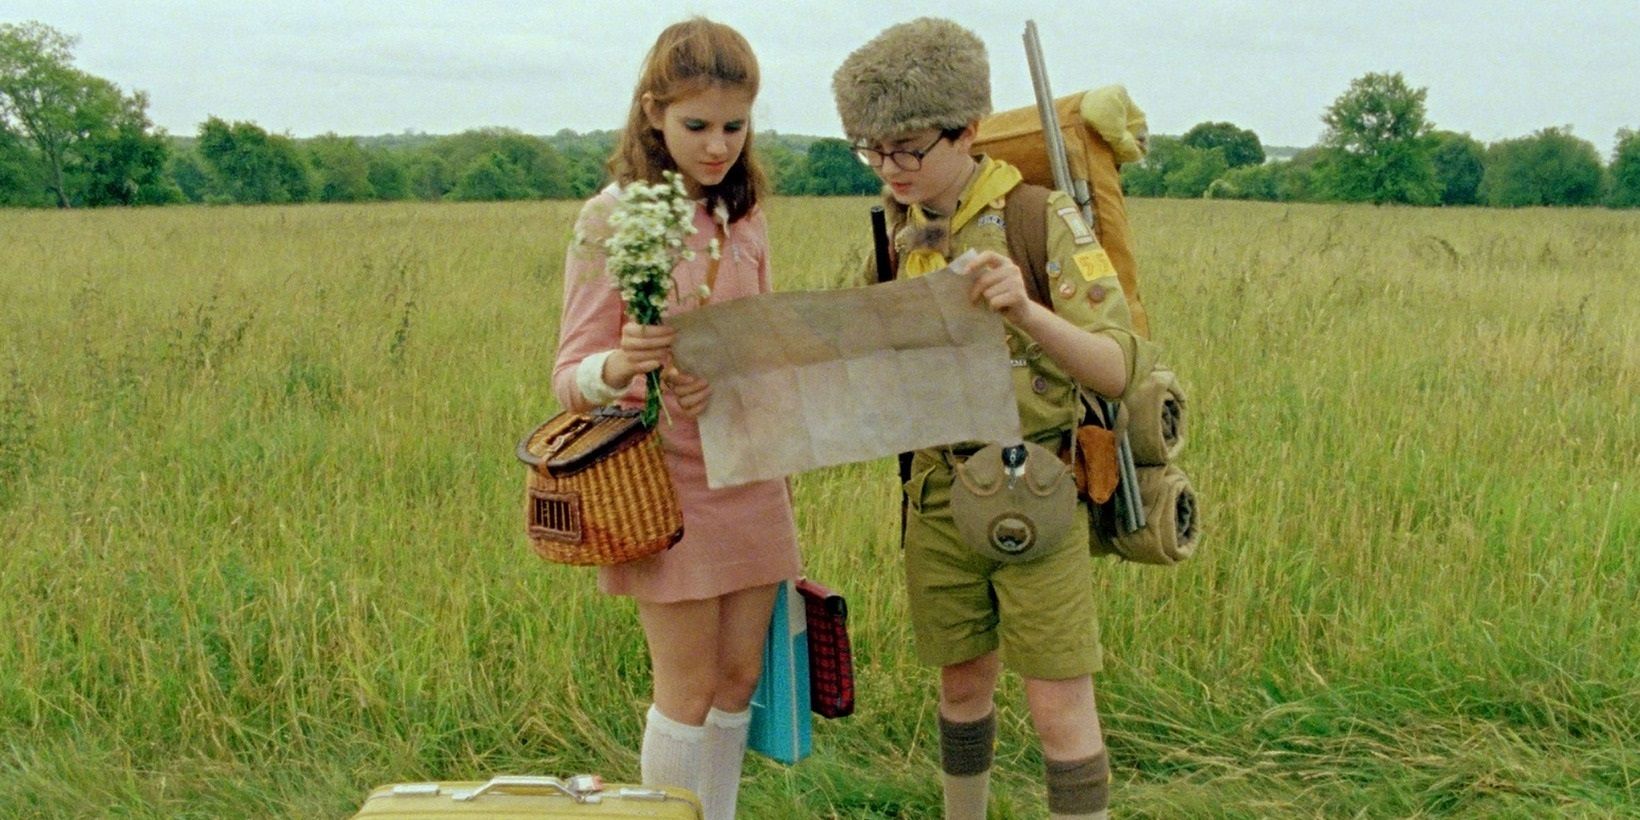 Sam and Suzy in a field in Moonrise Kingdom